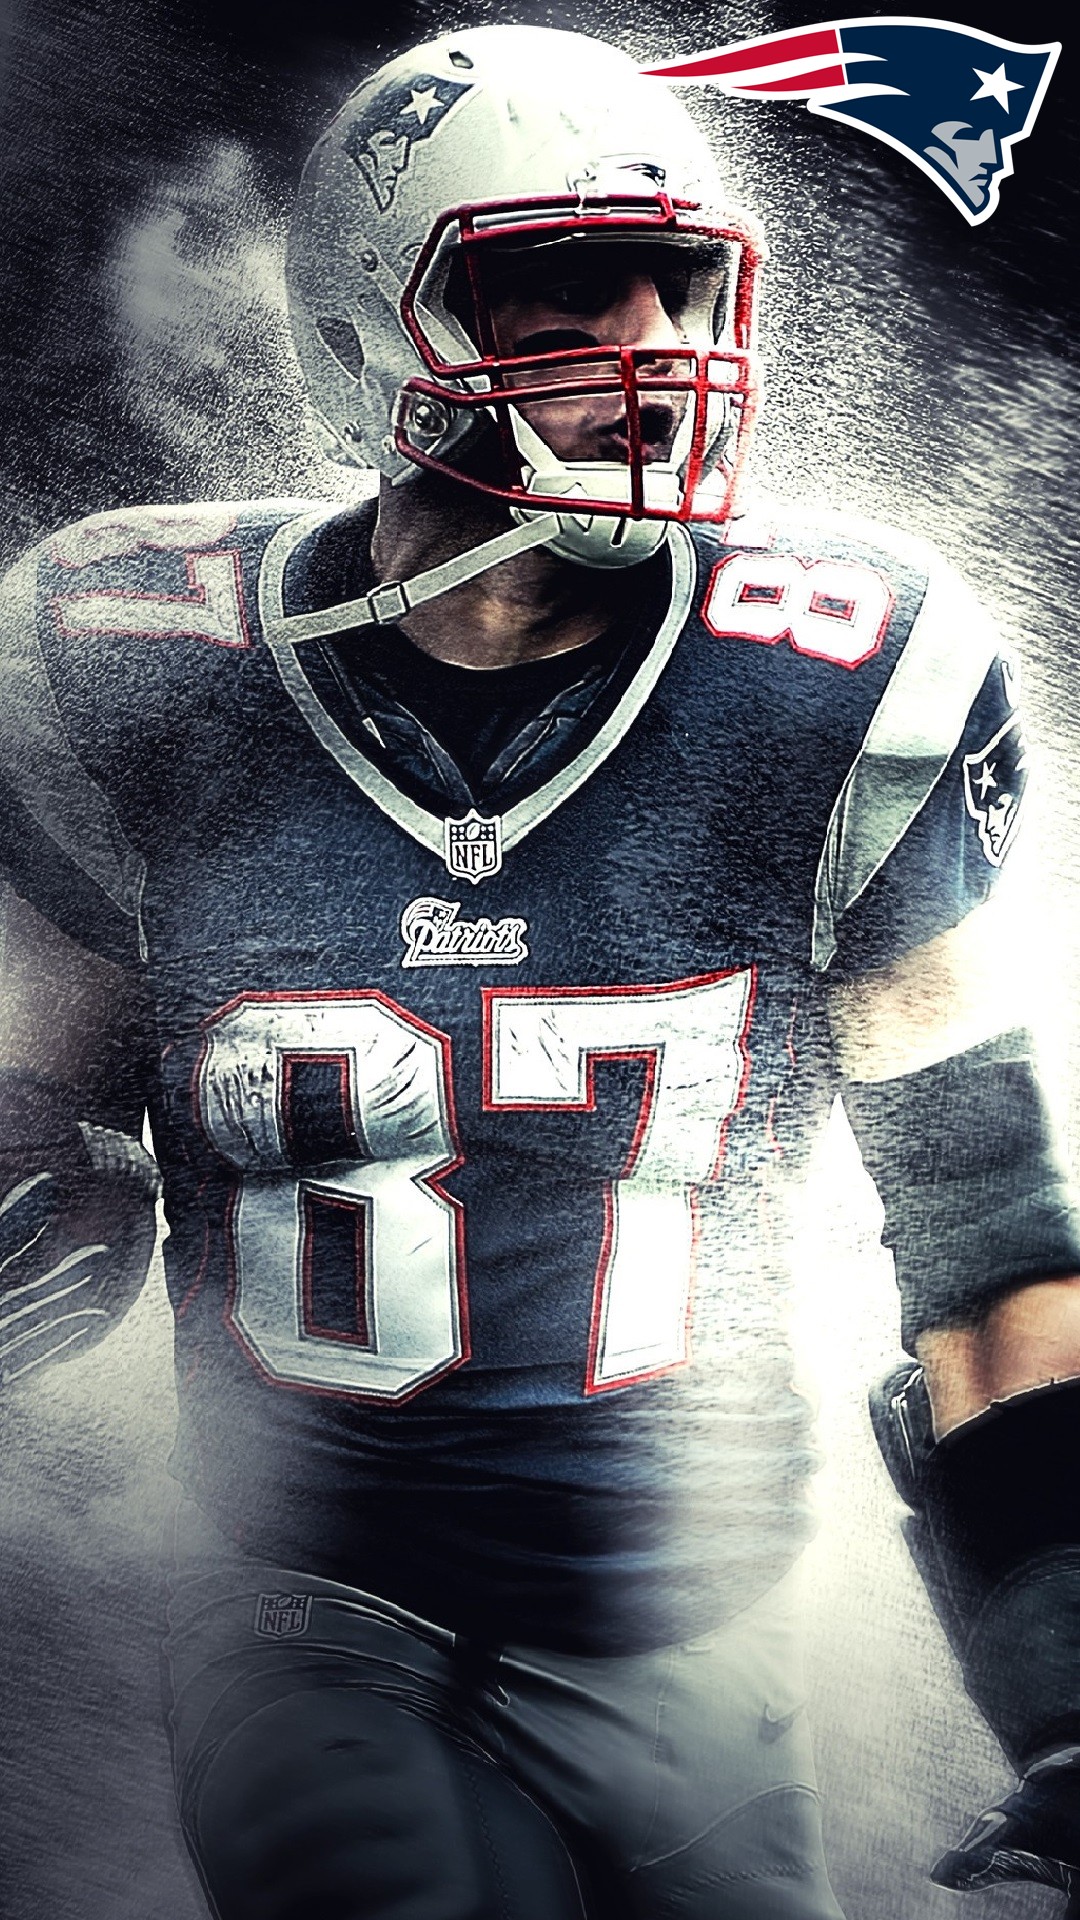 Screensaver iPhone NE Patriots With high-resolution 1080X1920 pixel. Donwload and set as wallpaper for your iPhone X, iPhone XS home screen backgrounds, XS Max, XR, iPhone8 lock screen wallpaper, iPhone 7, 6, SE, and other mobile devices